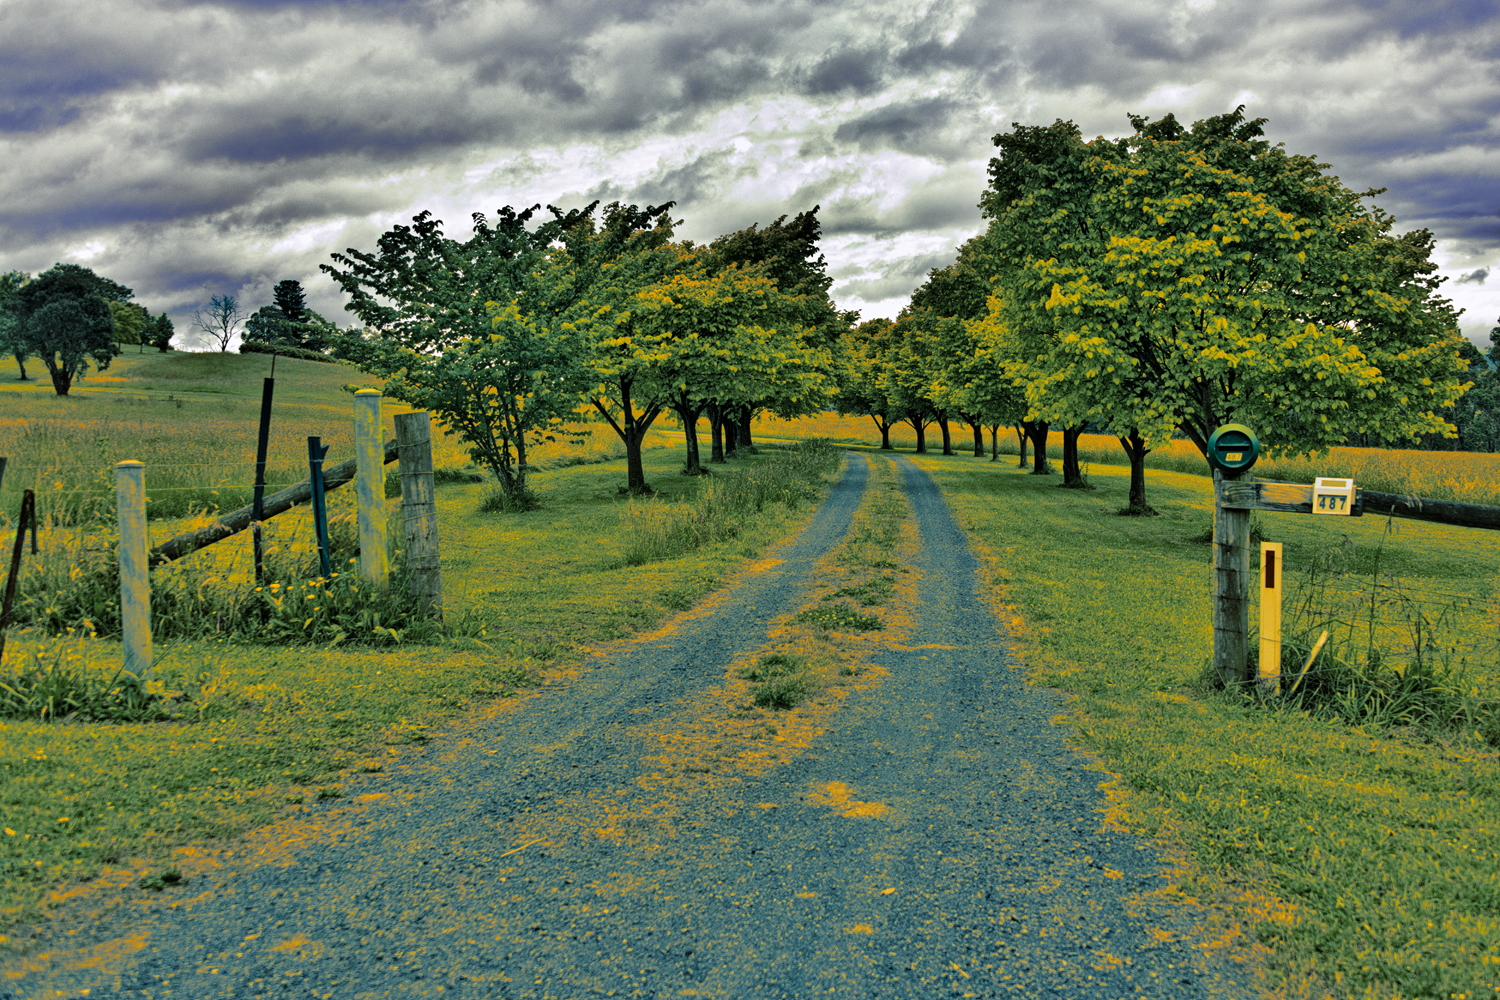 Colour tinted photograph depicting country road-side landscape.